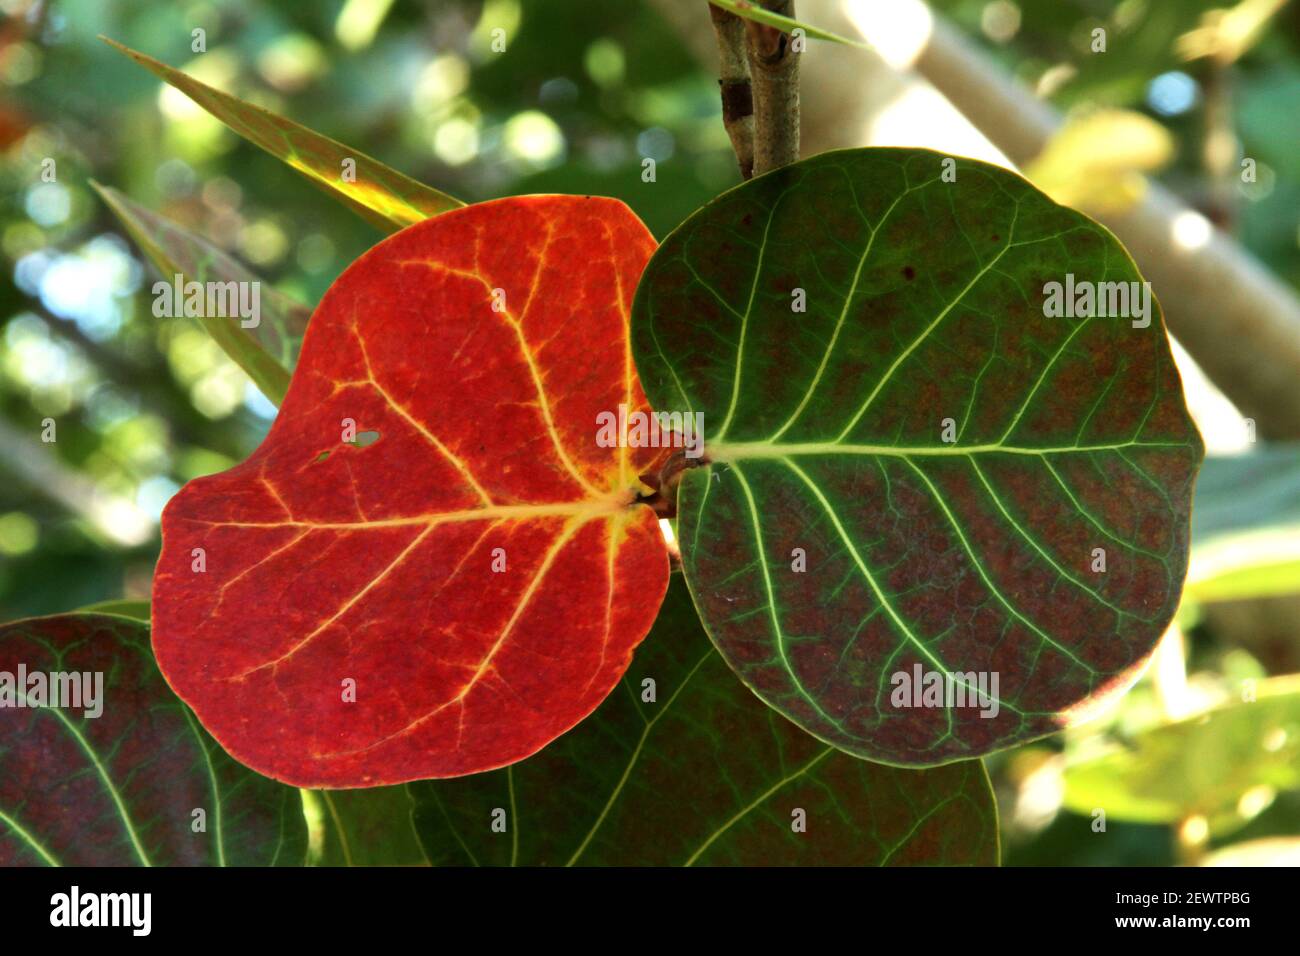 Close-up of the leaves of a Seagrape/ Baygrape tree in Florida, USA. The aged leaves are turning colors. Stock Photo